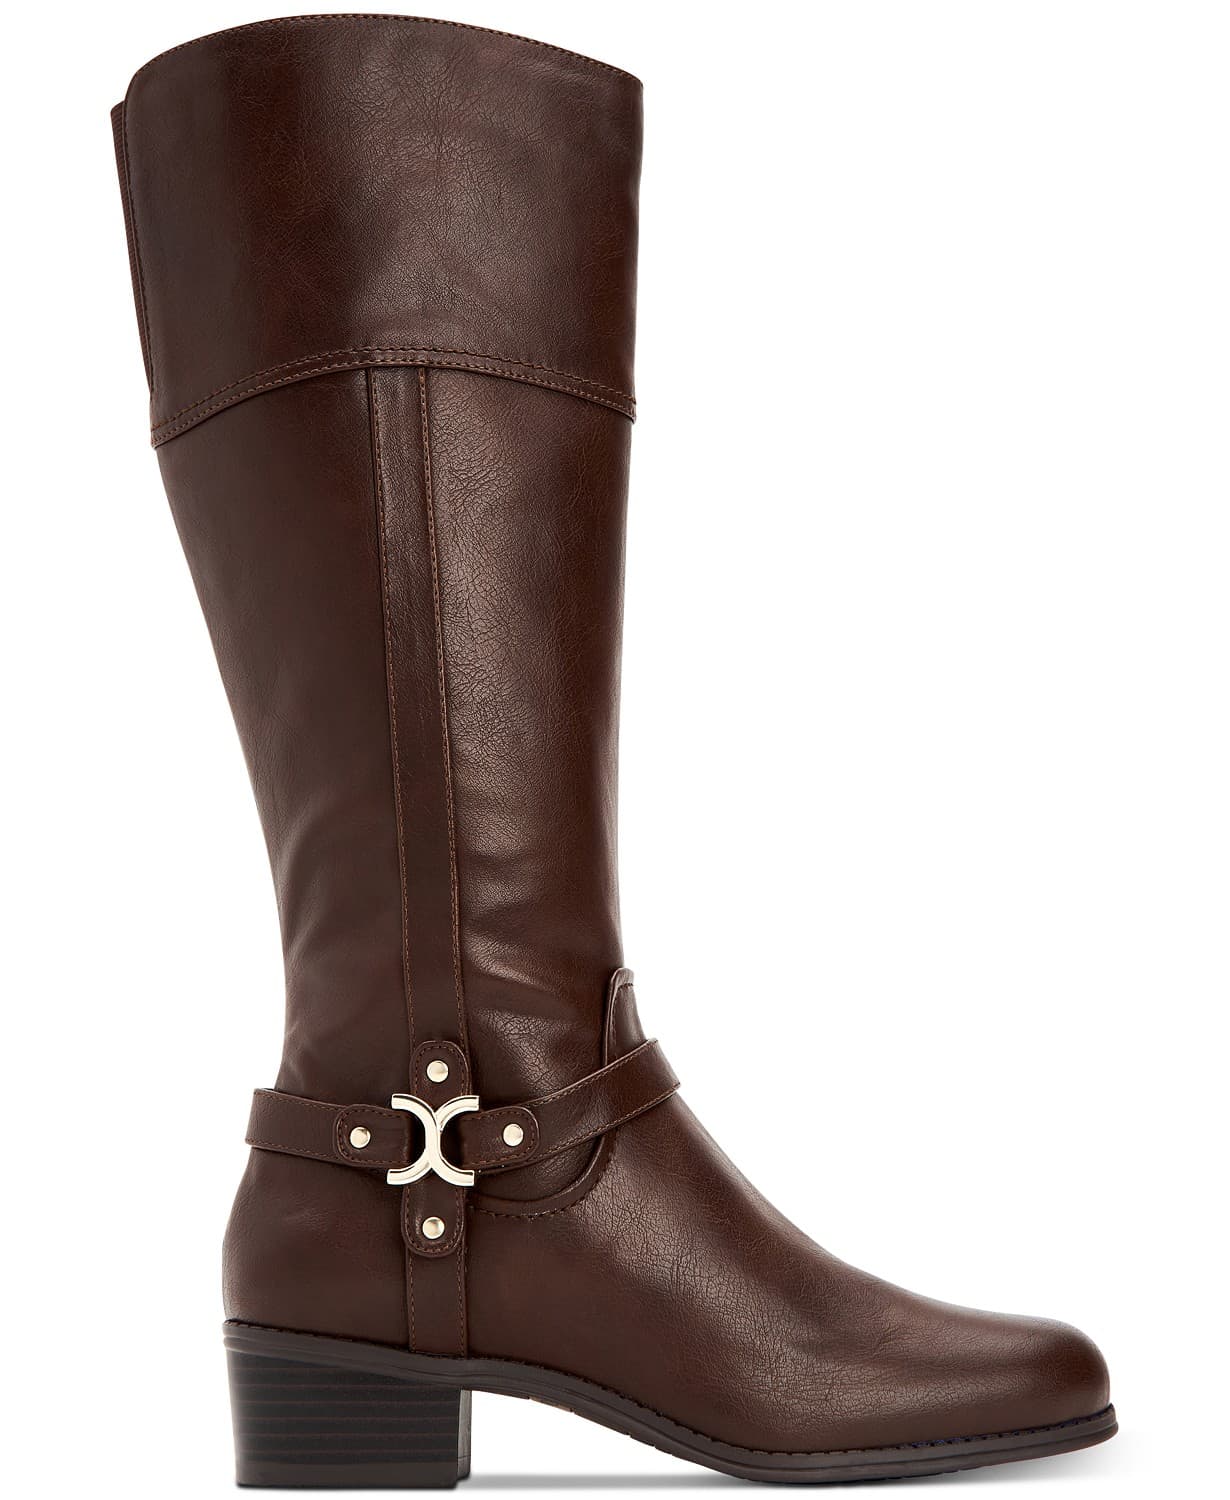 woocommerce-673321-2209615.cloudwaysapps.com-charter-club-womens-brown-leather-helenn-riding-boots